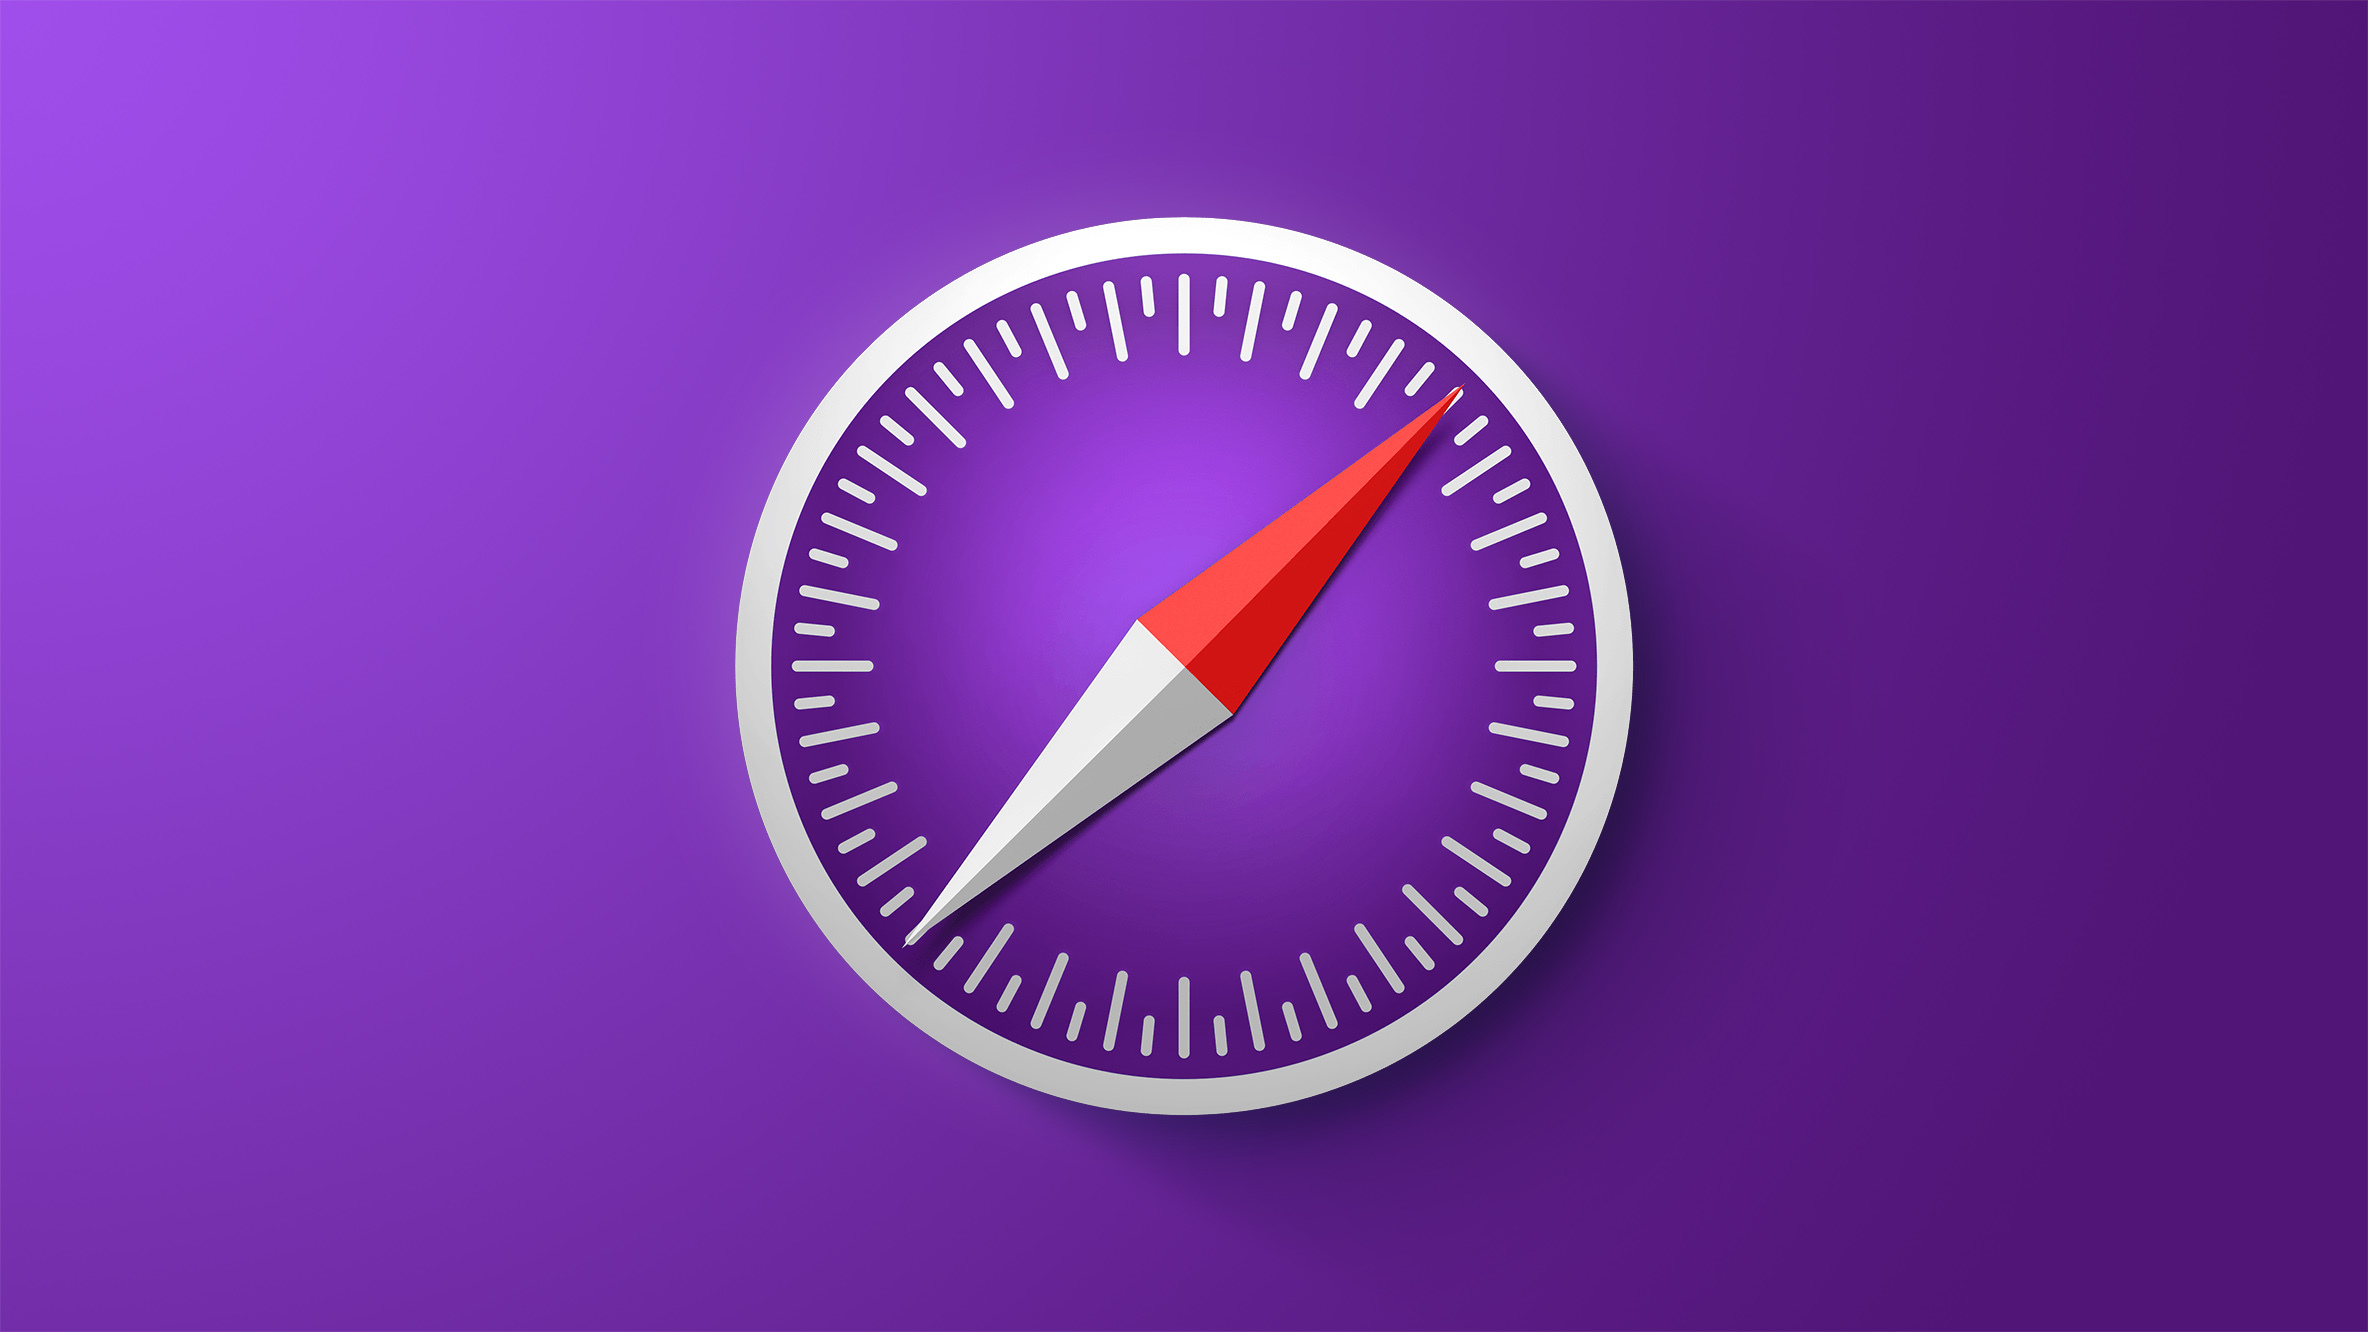 Apple Releases Safari Technology Preview 154 With Bug Fixes and Performance Improvements